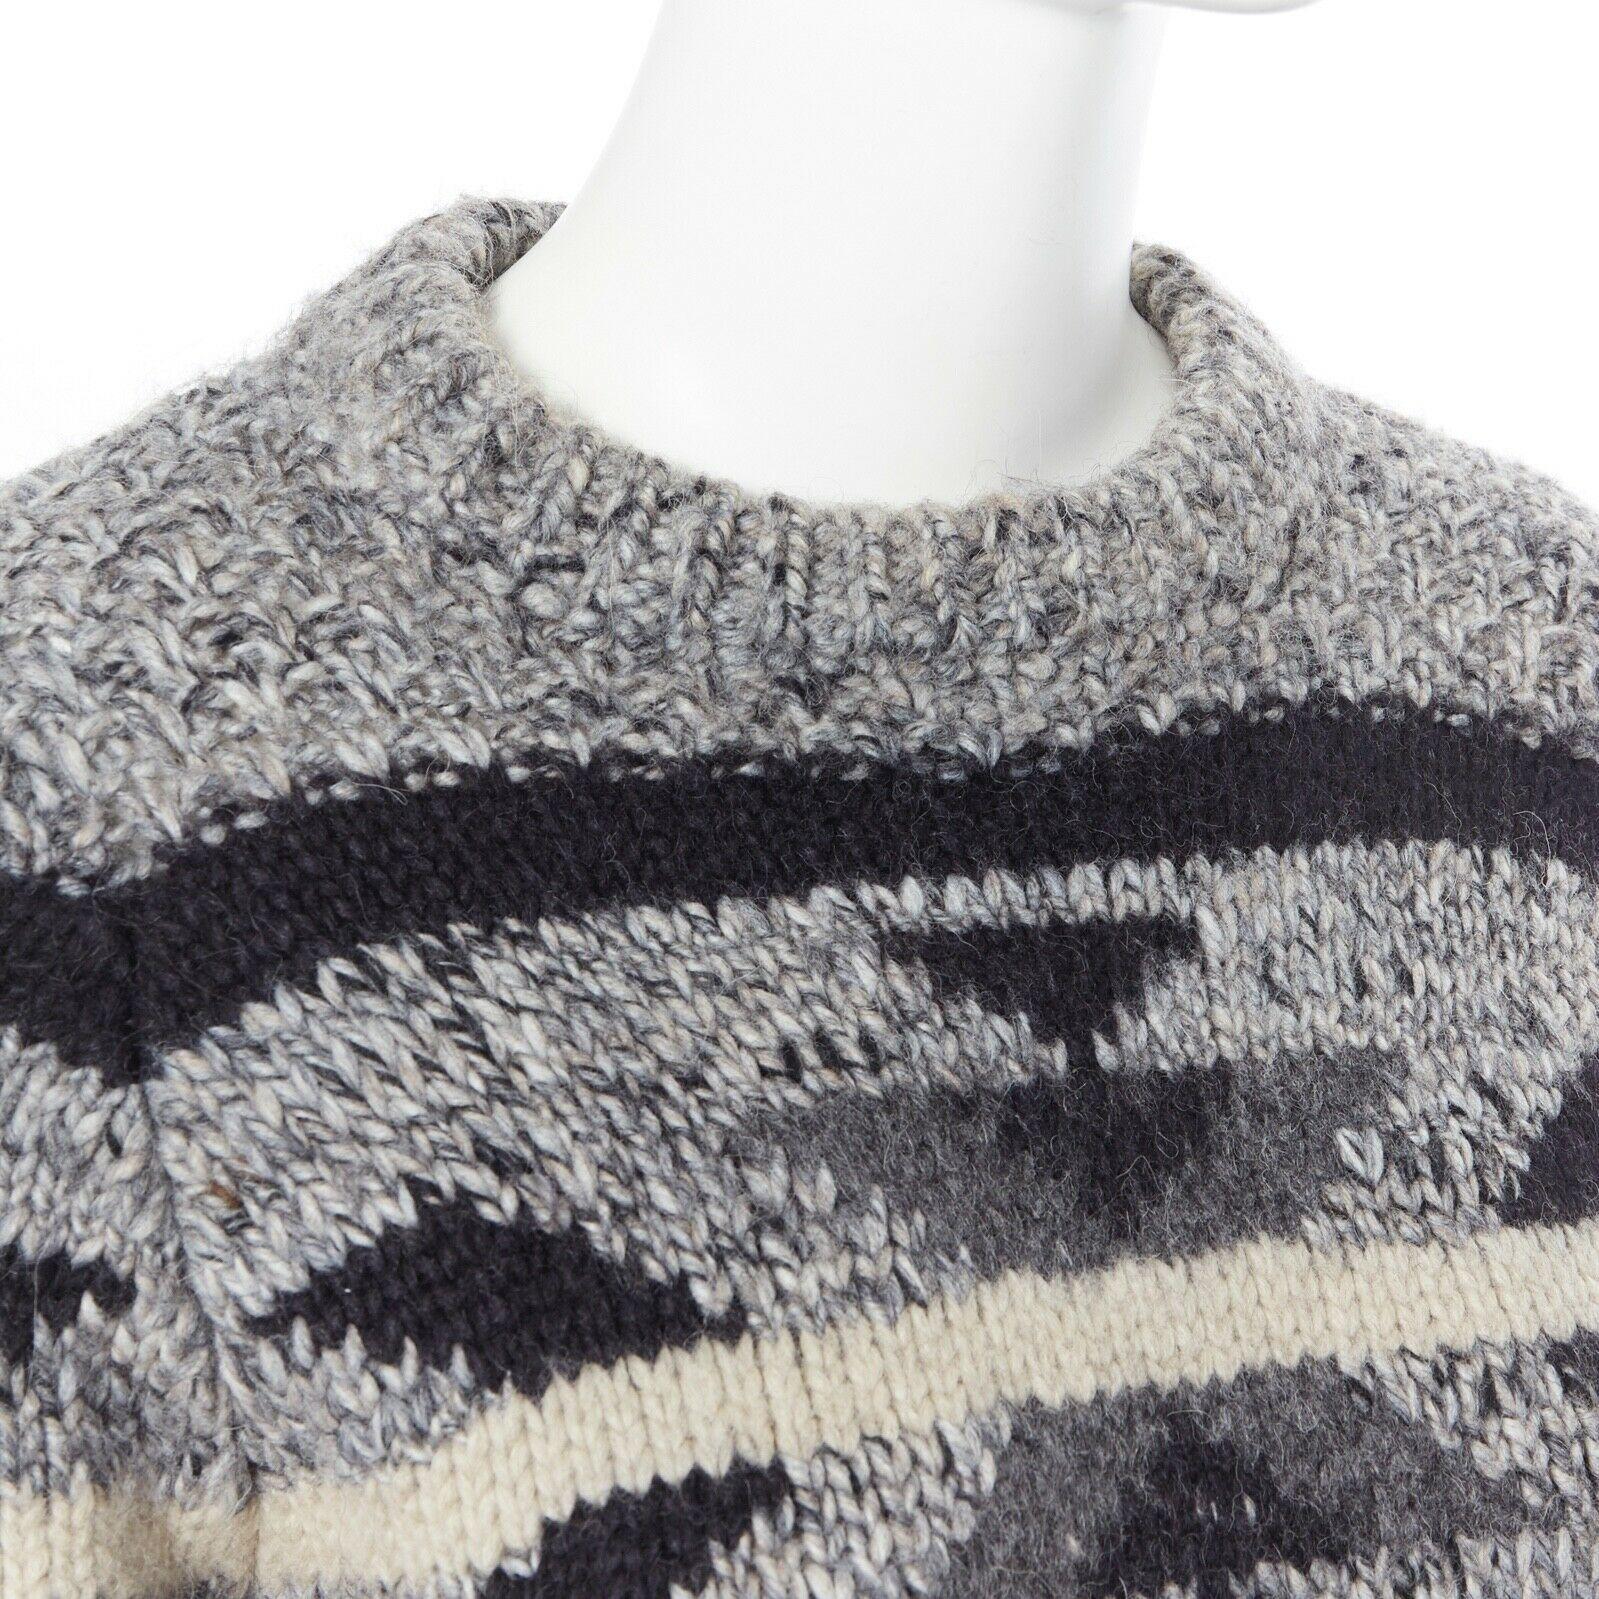 ISABEL MARANT ETOILE grey wool blend knit ski pullover sweater jumper FR36 S 
Reference: JETI/A00169 
Brand: Isabel Marant 
Designer: Isabel Marant 
Material: wool 
Color: Grey 
Pattern: Argyle/Diamond 
Extra Detail: Pullover sweater. Skiwear style.